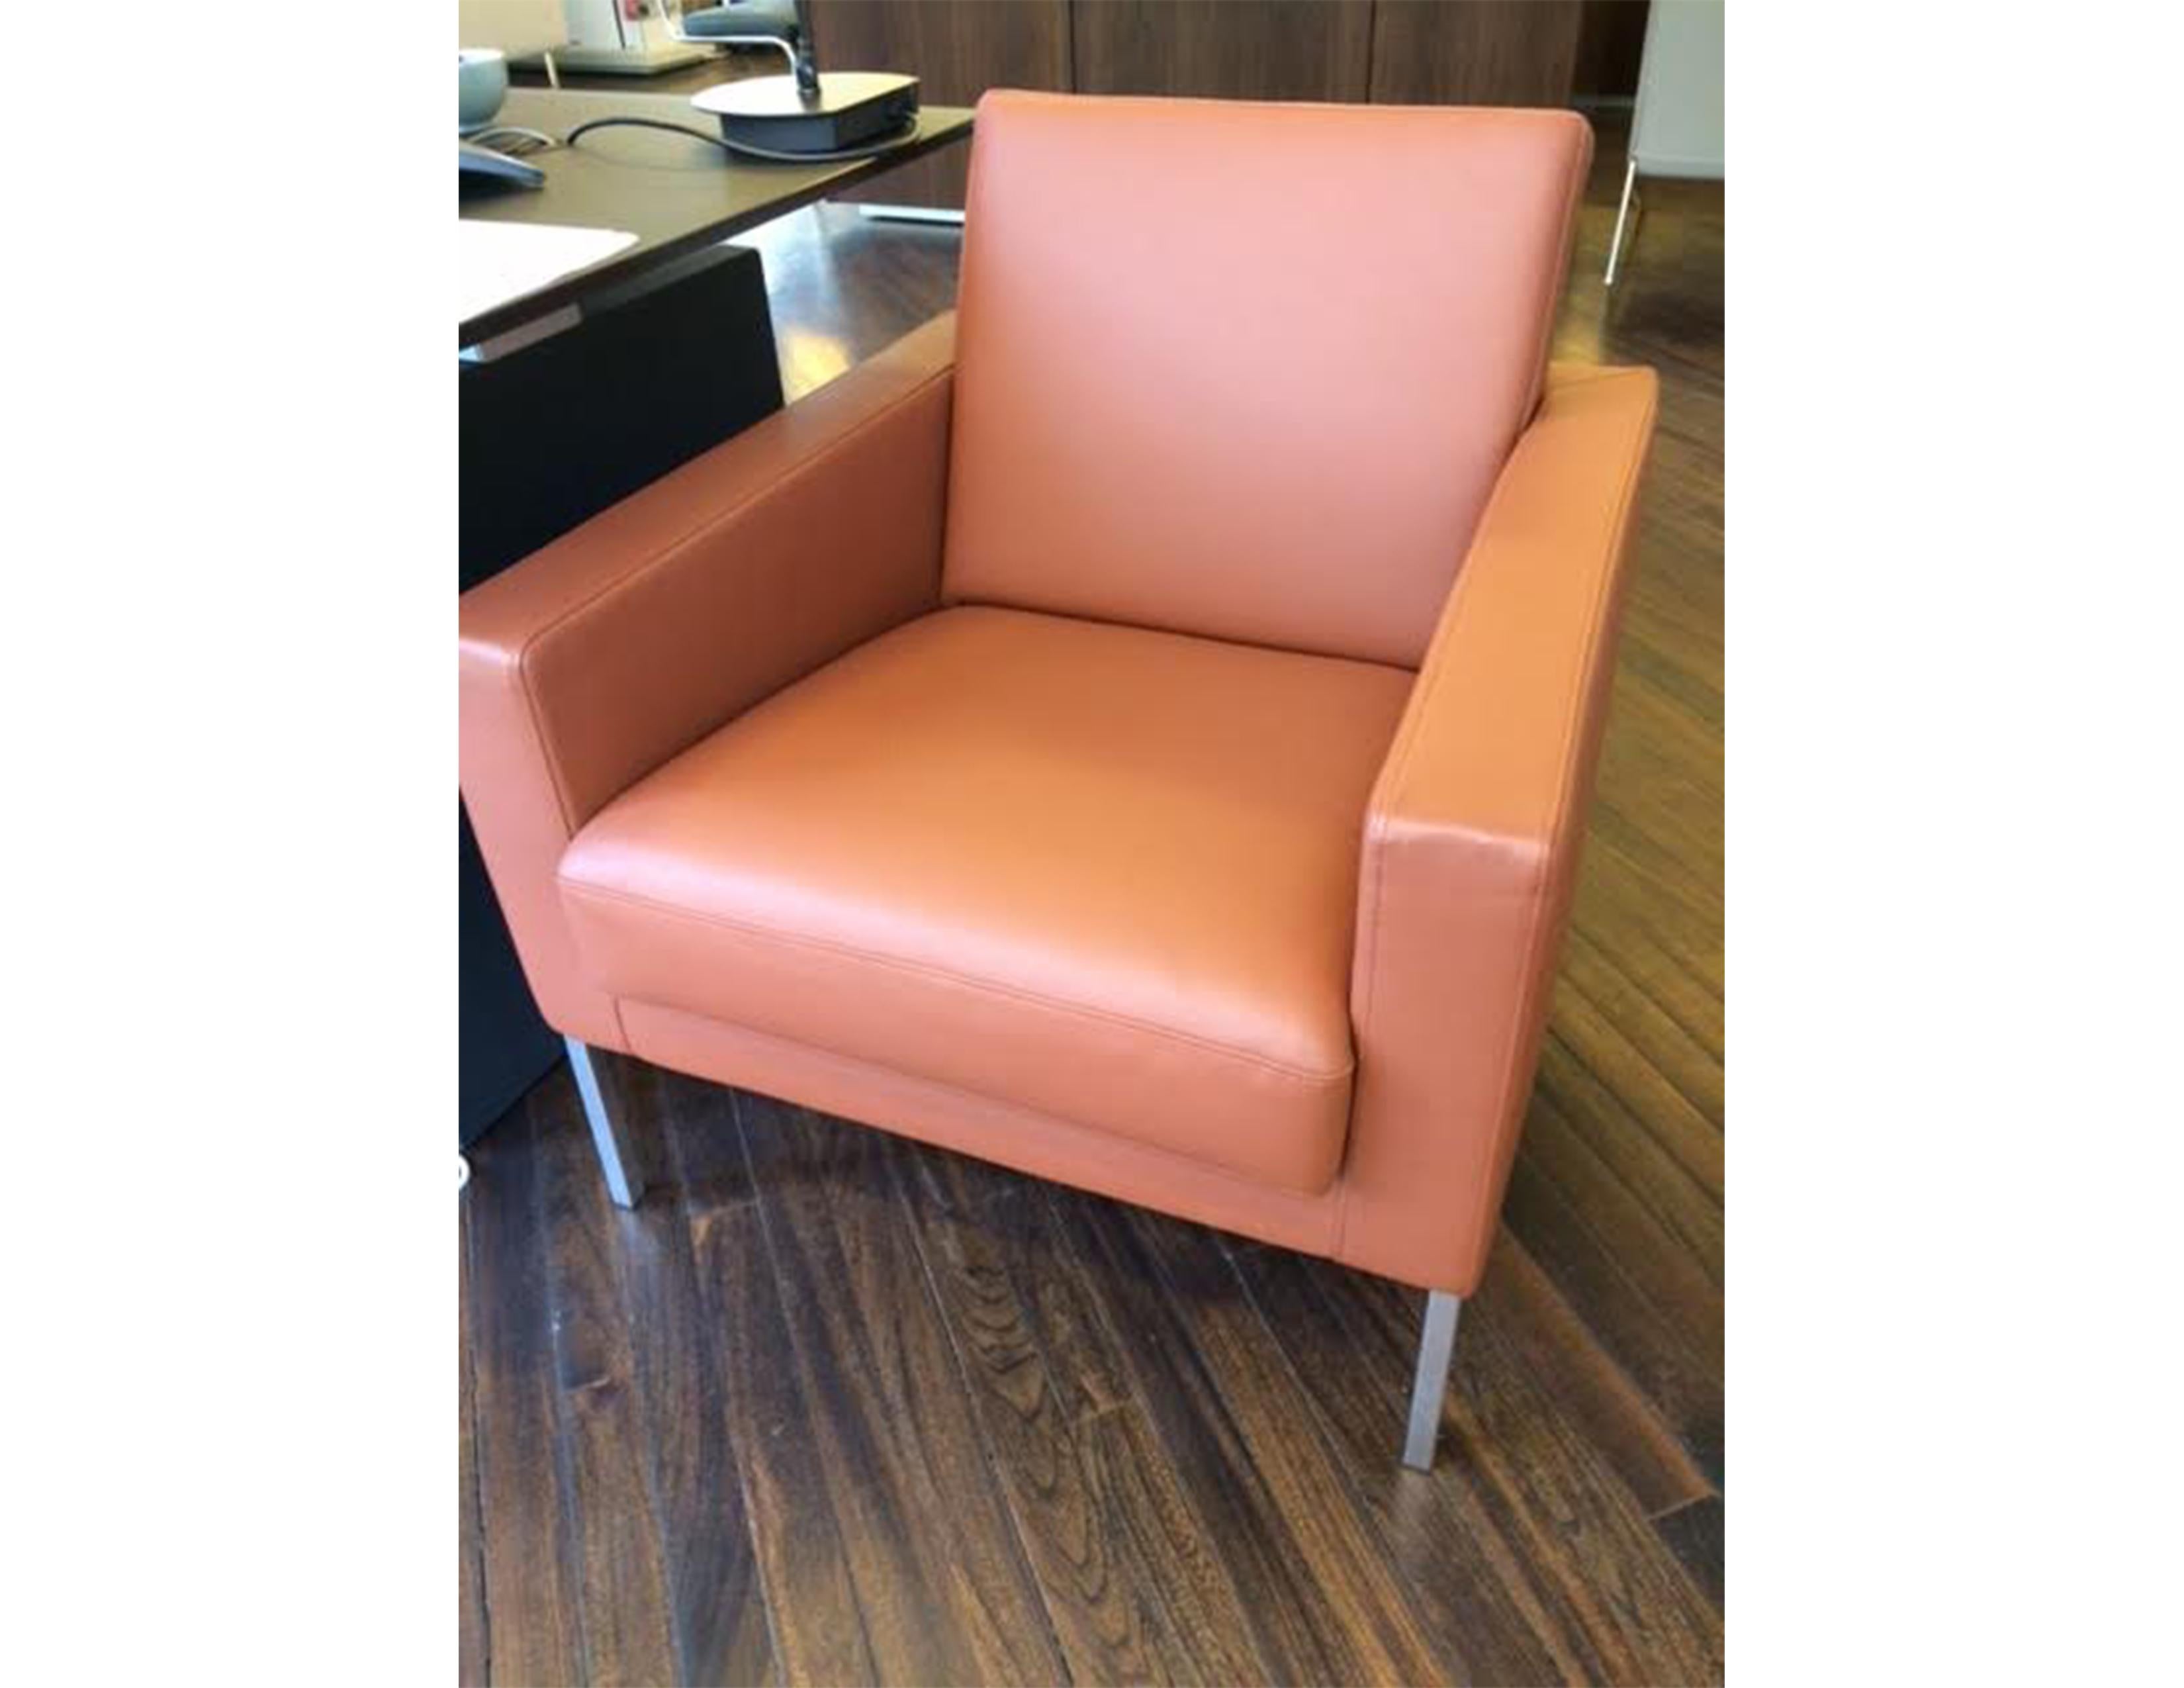 Leon lounge chair
Leather as shown
Model#: 431-10 
Chromed frame
Original Price: $3,500 .00

